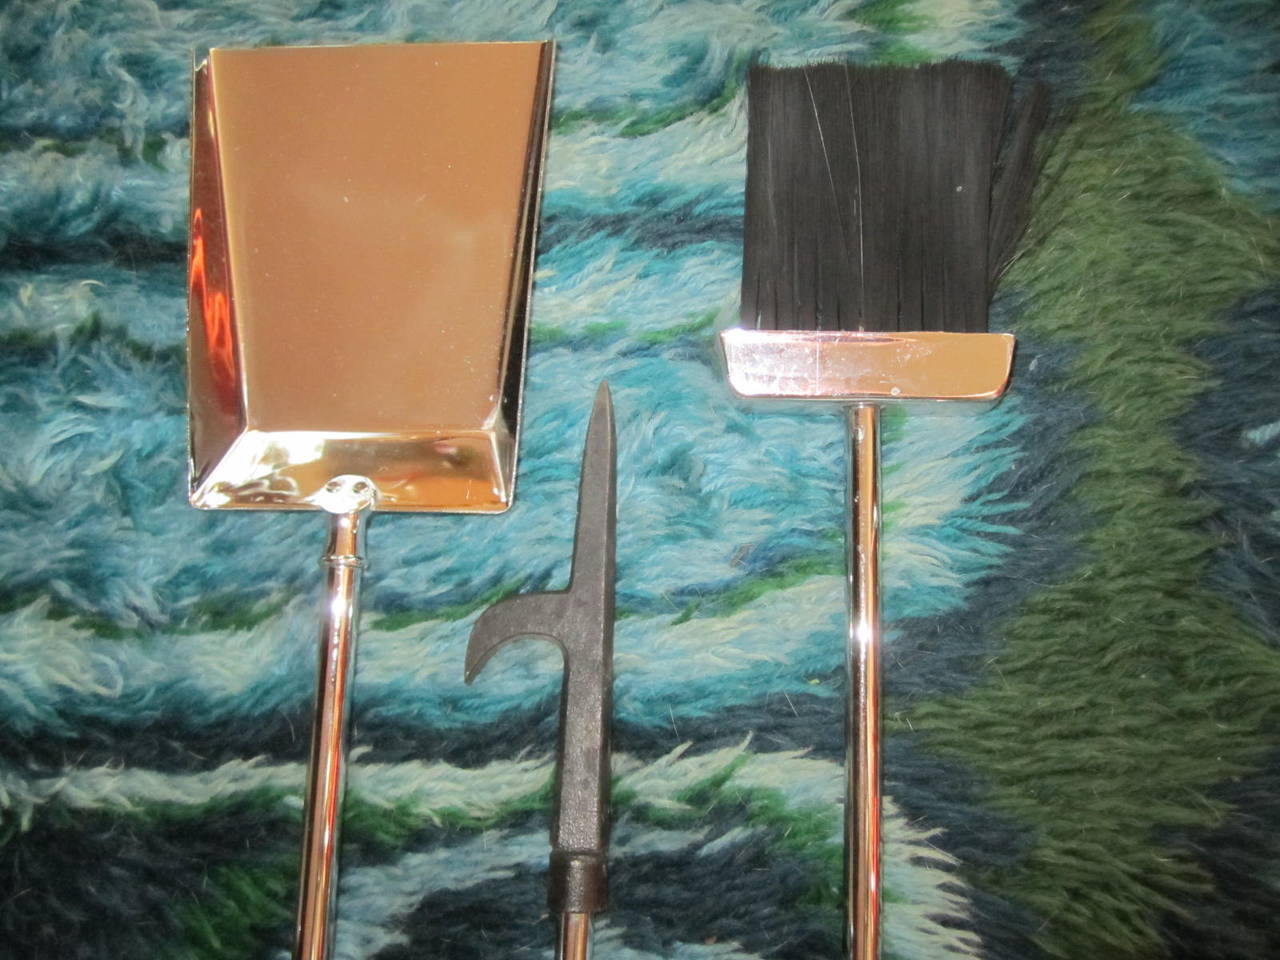 Lucite Chrome Fireplace Tools Set - Mid-Century Modern In Excellent Condition For Sale In Pemberton, NJ